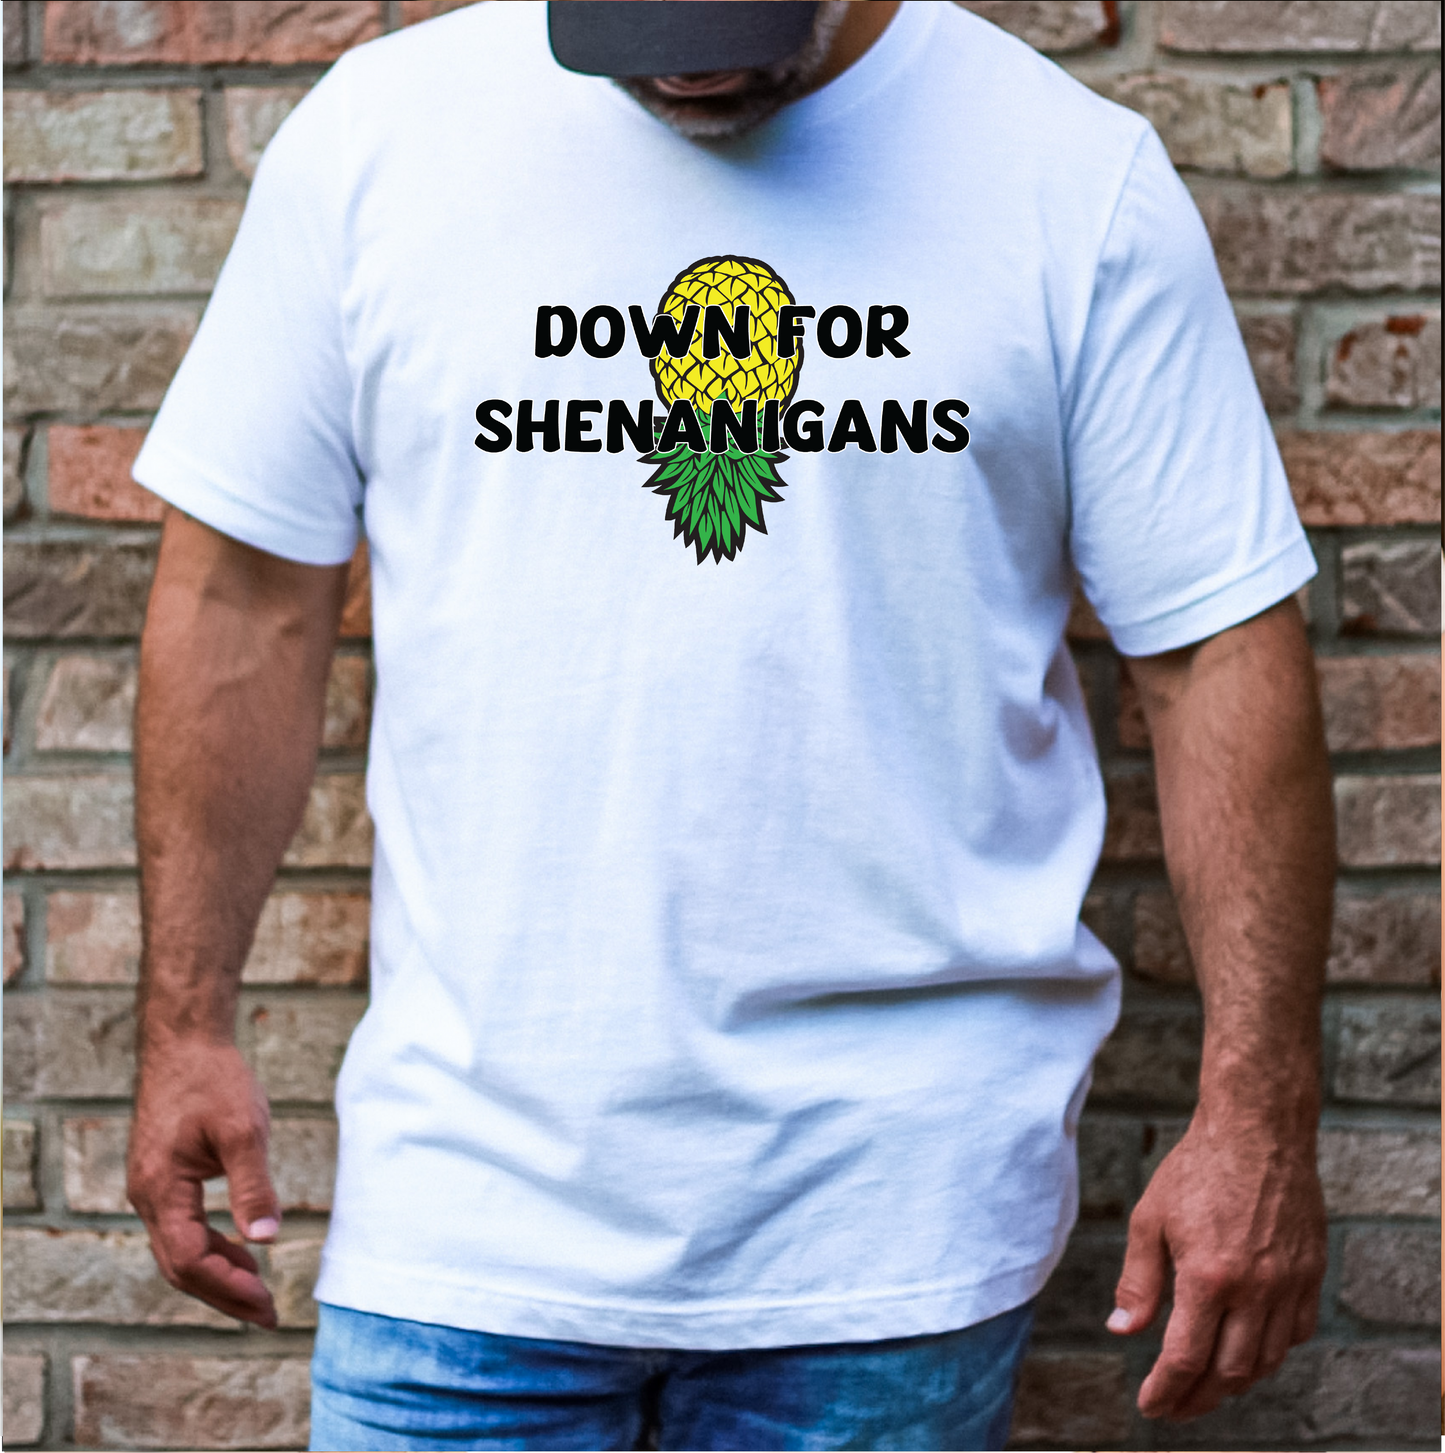 Down For Shenanigans T-Shirt